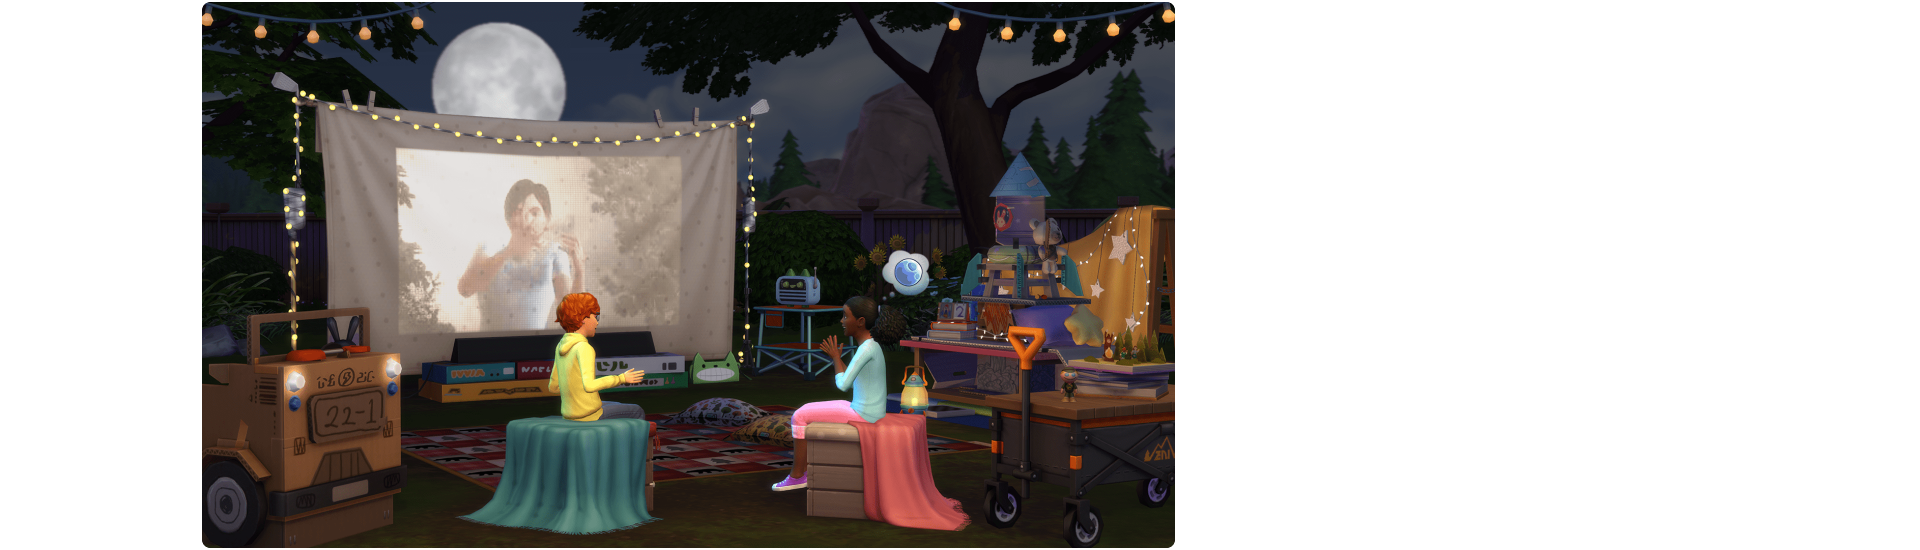 ts4-kit-15-hero-md-features-01-7x2-xl.png.adapt.crop7x2.1920w